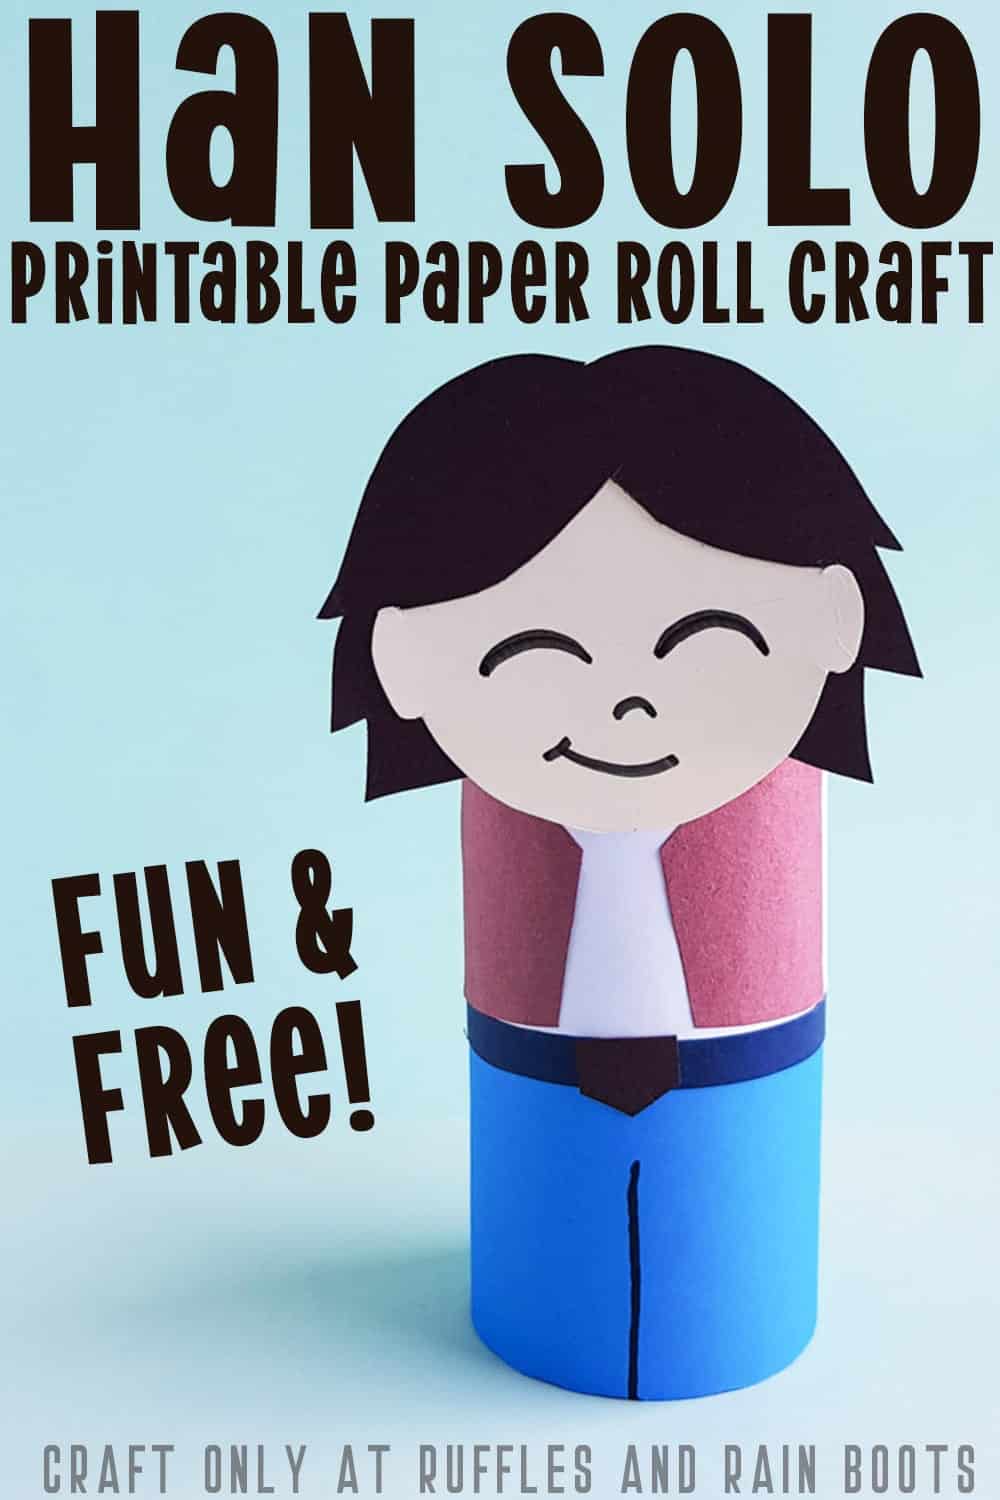 Close up vertical image of Han Solo Paper roll with text which reads Han Solo printable paper roll craft.